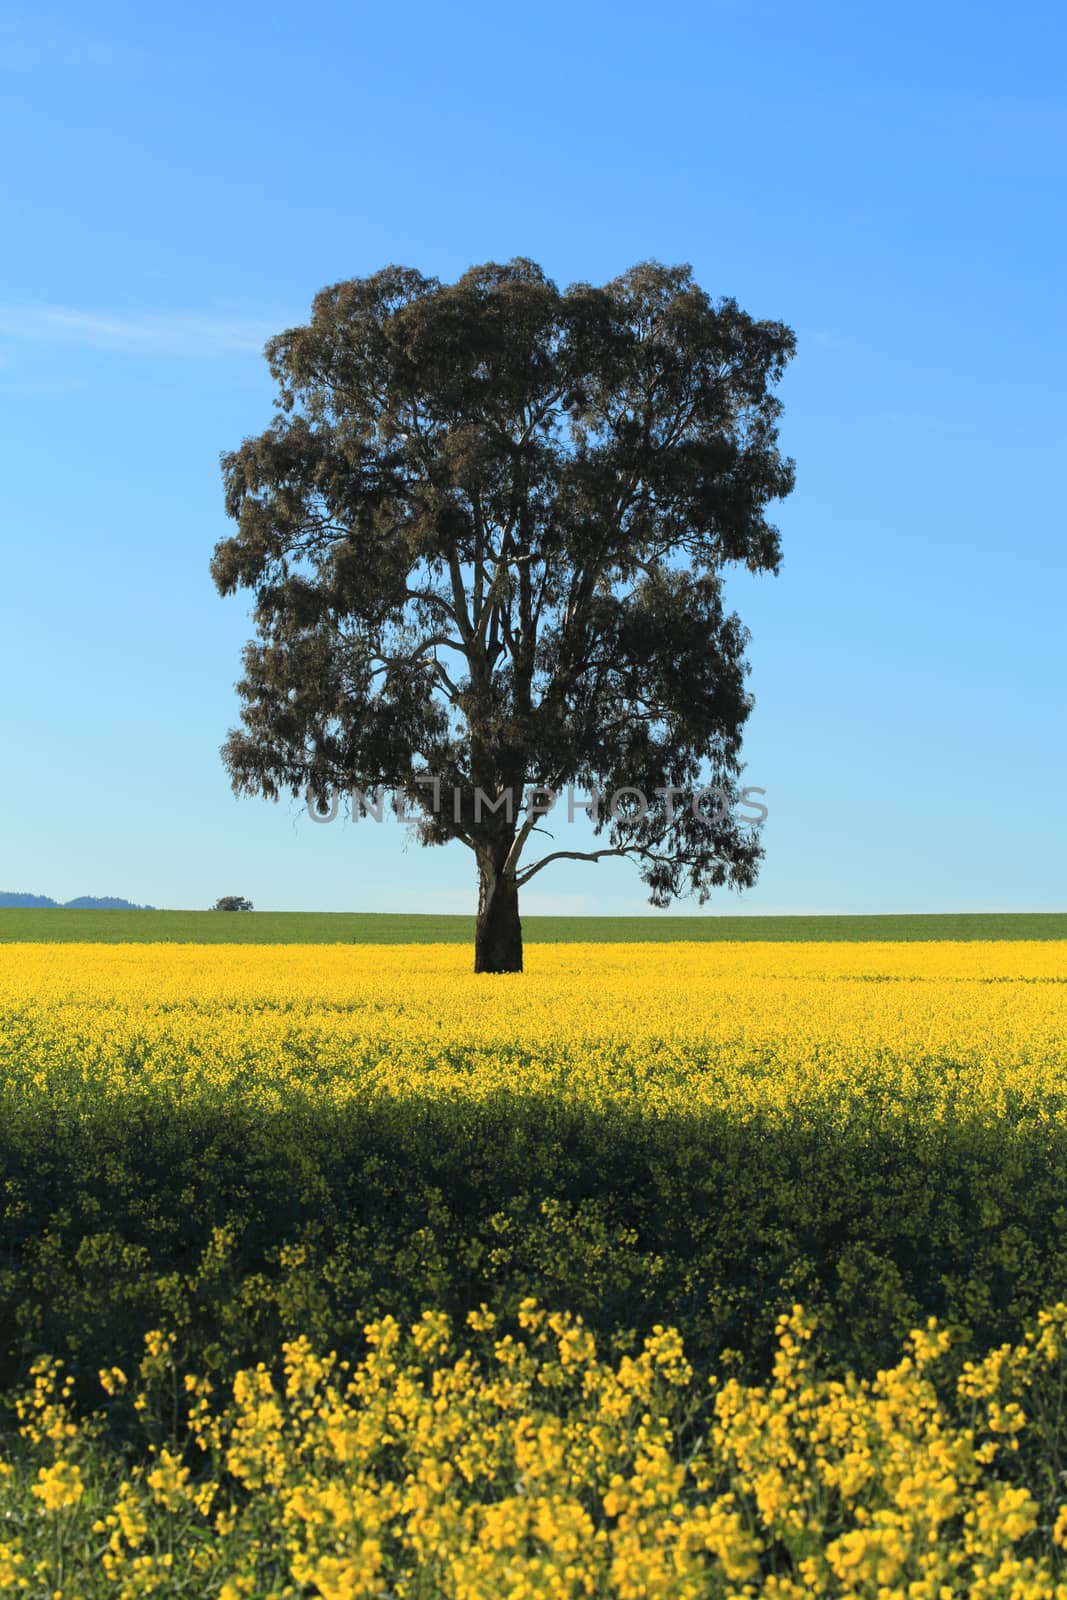 Canola field blooming brightly in rural NSW Australia